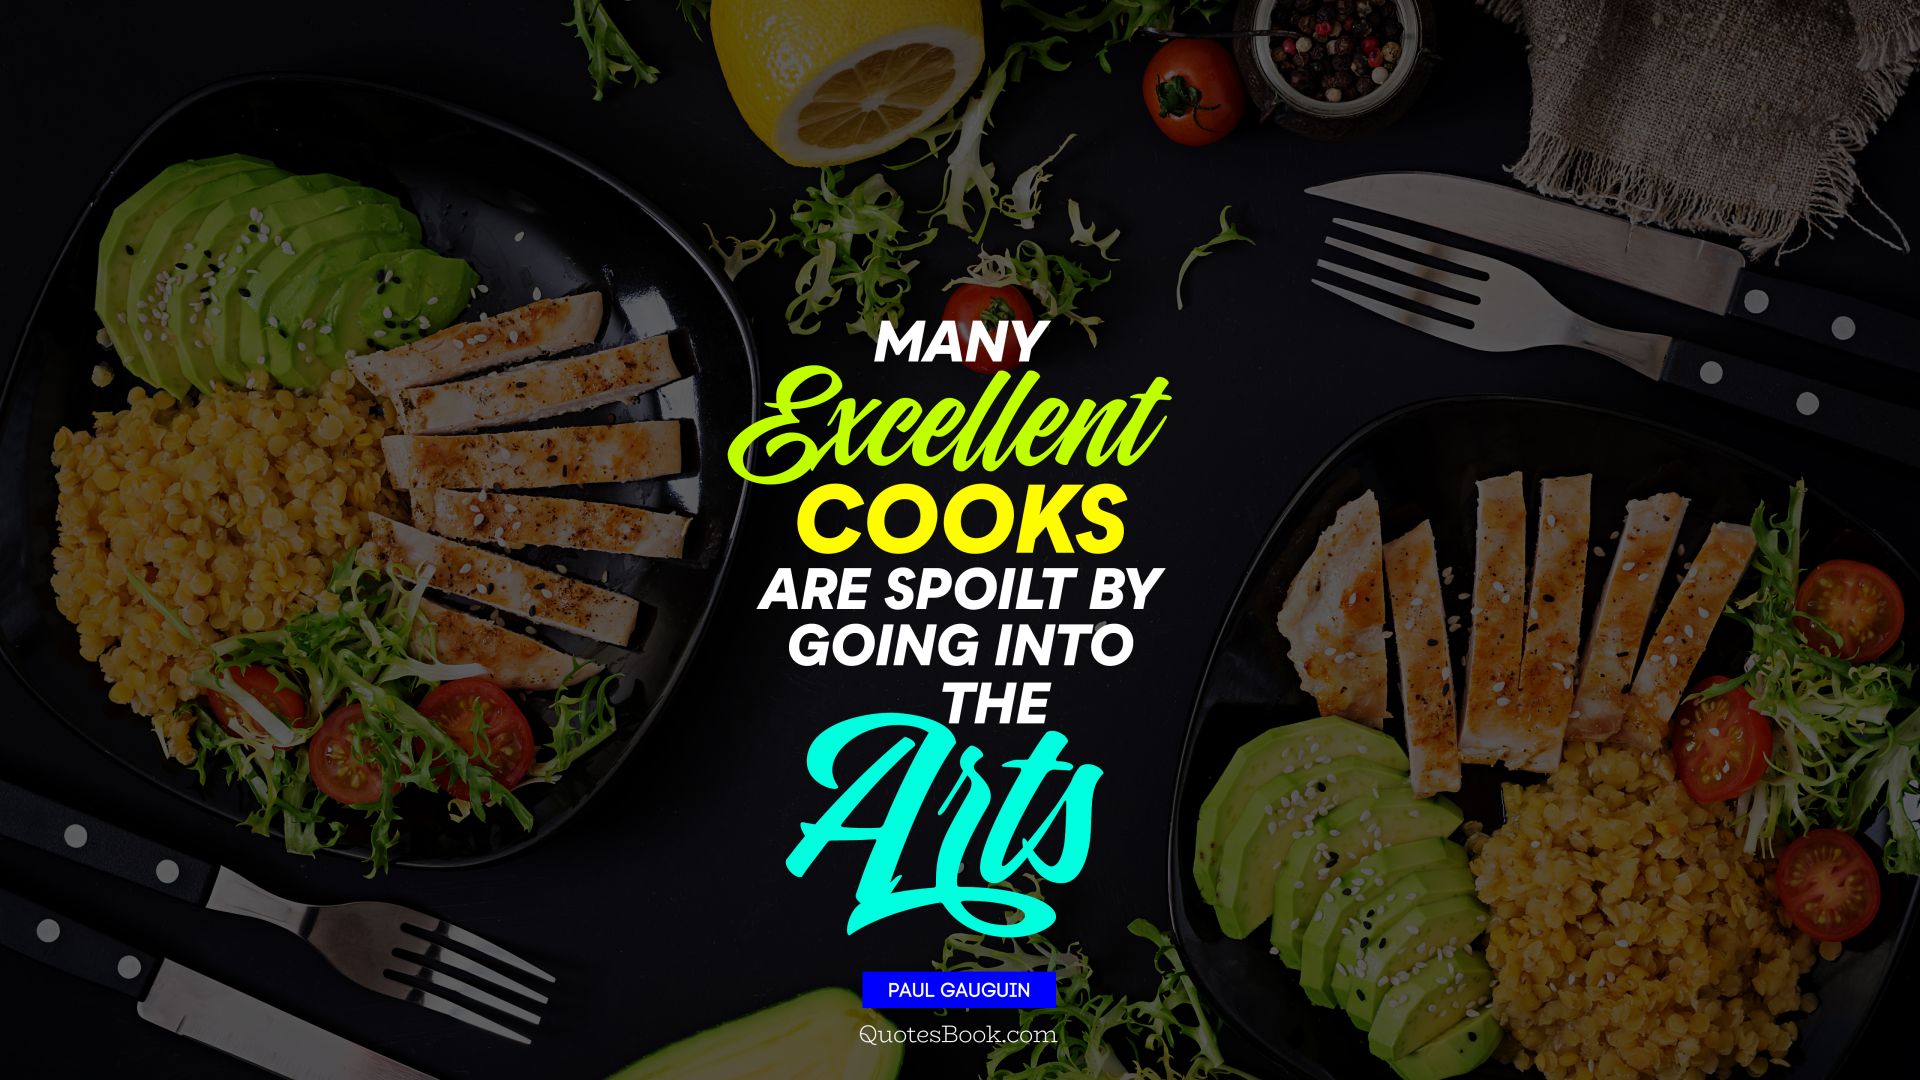 Many excellent cooks are spoilt by going into the arts. - Quote by Paul Gauguin